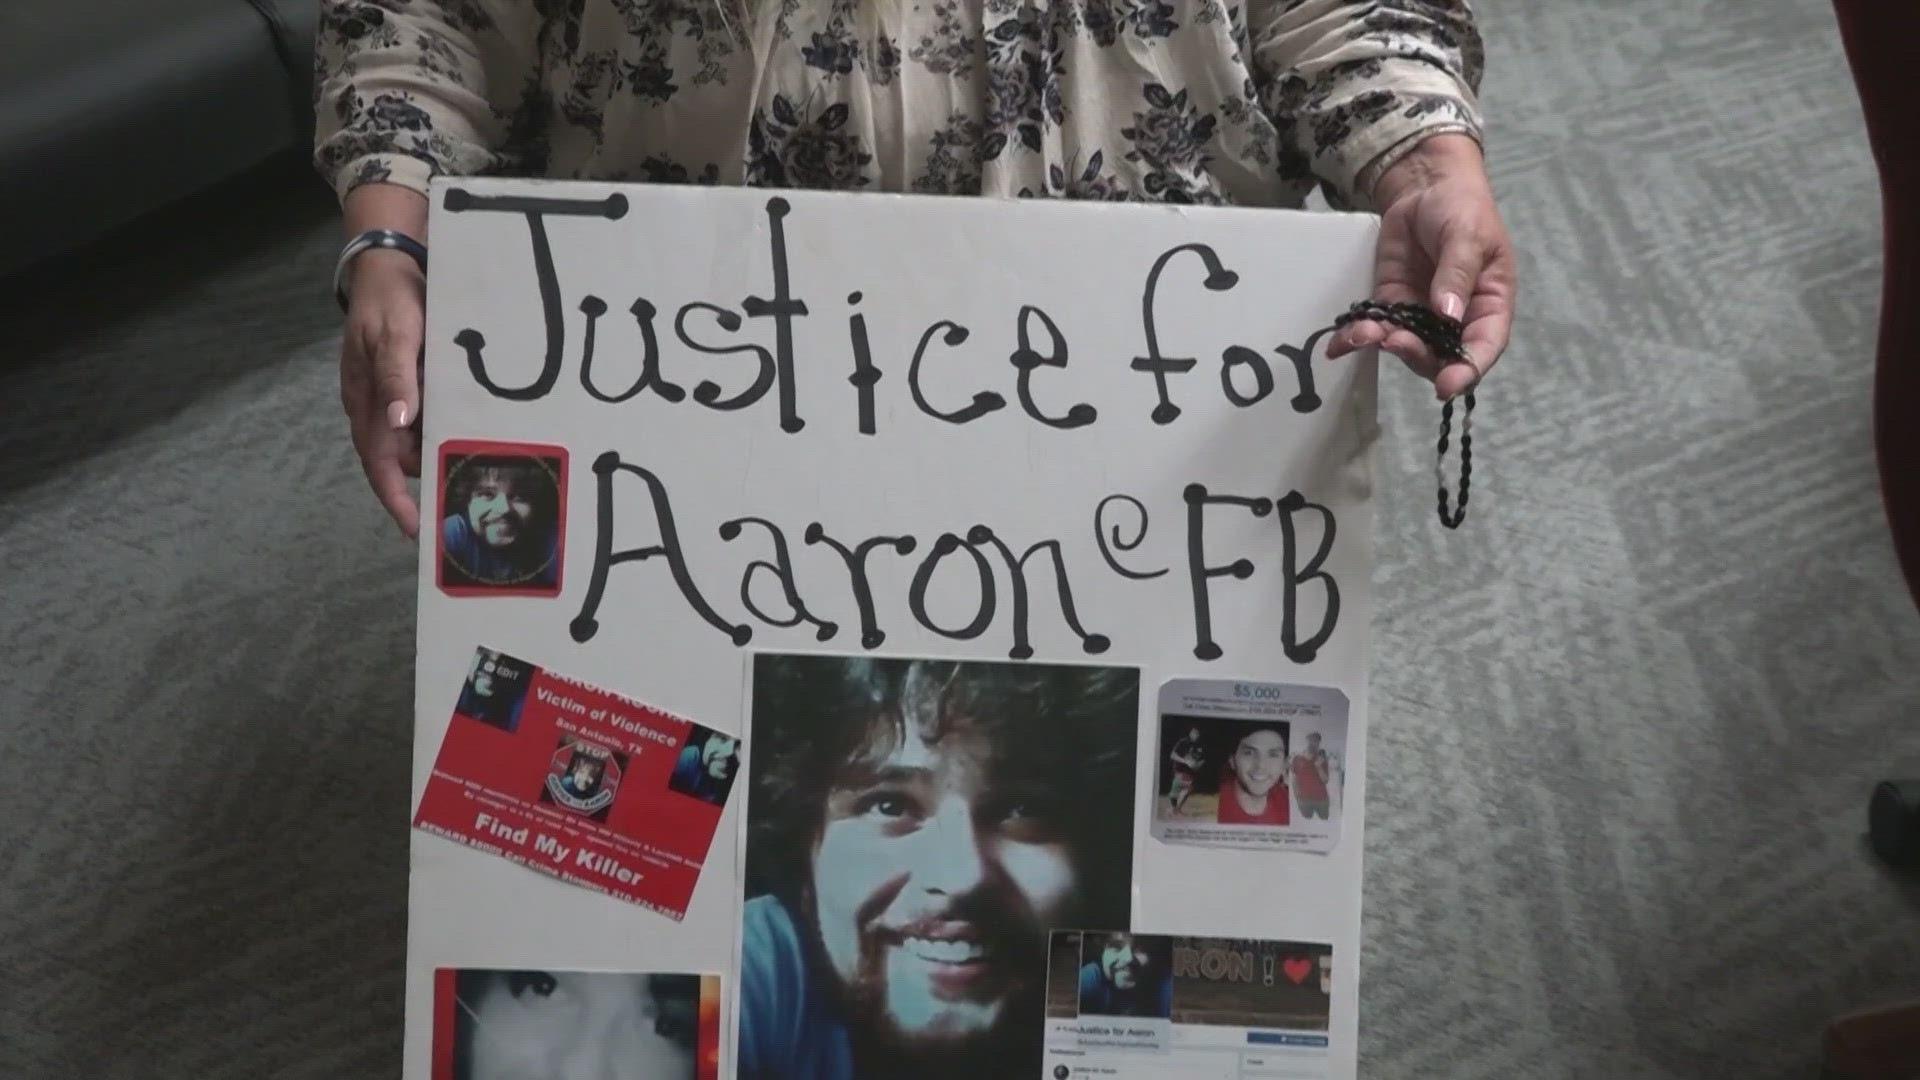 Lori Rocha has been fighting for Justice for her son, Aaron Rocha since November of 2016.